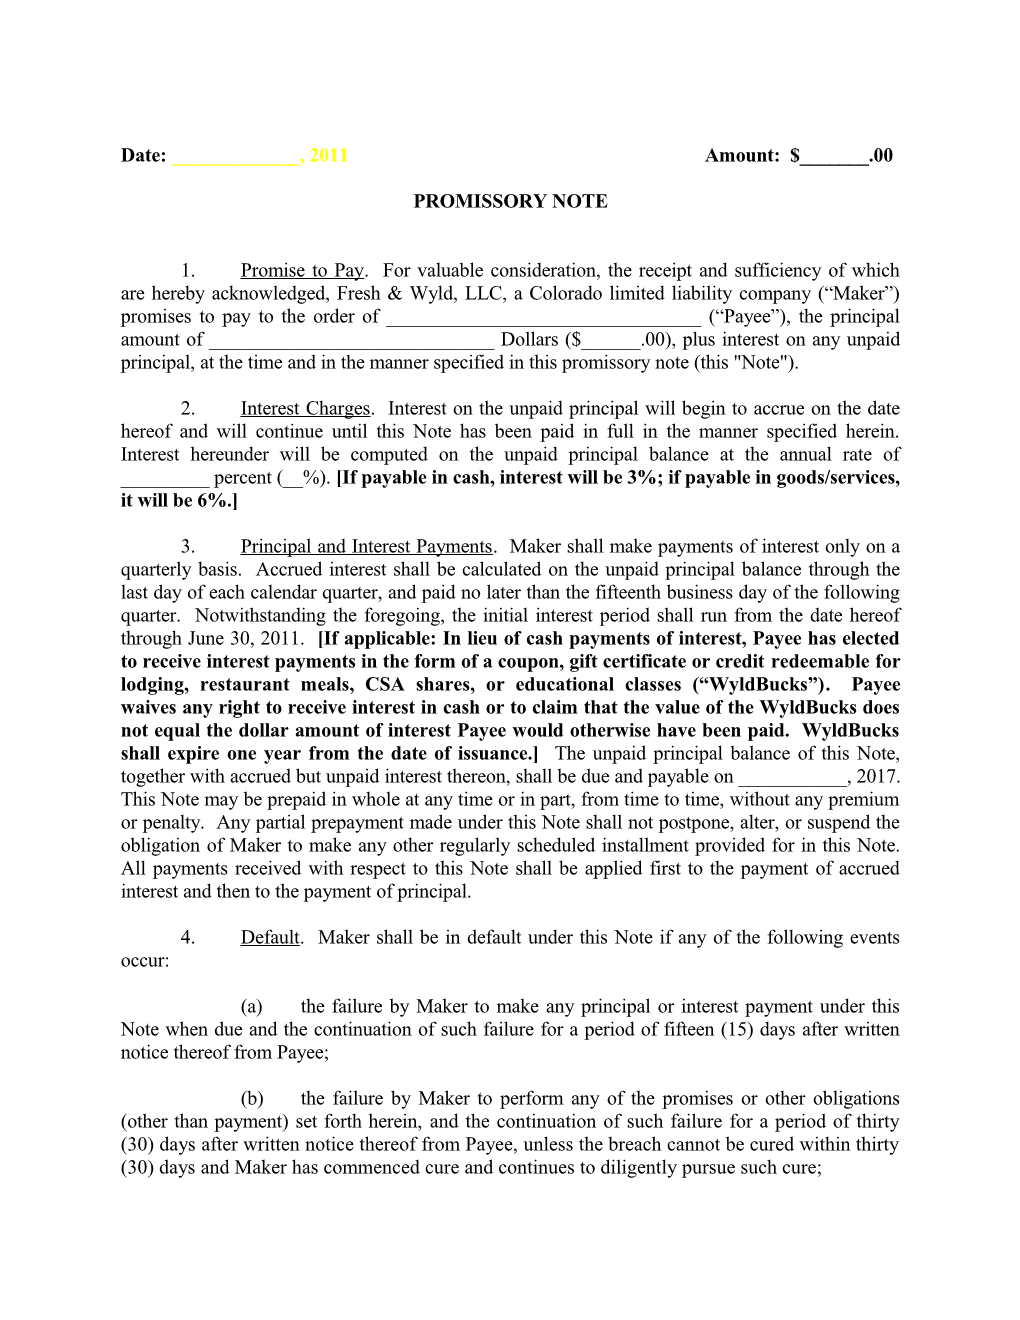 Promissory Note (Short Form) (238401;1)